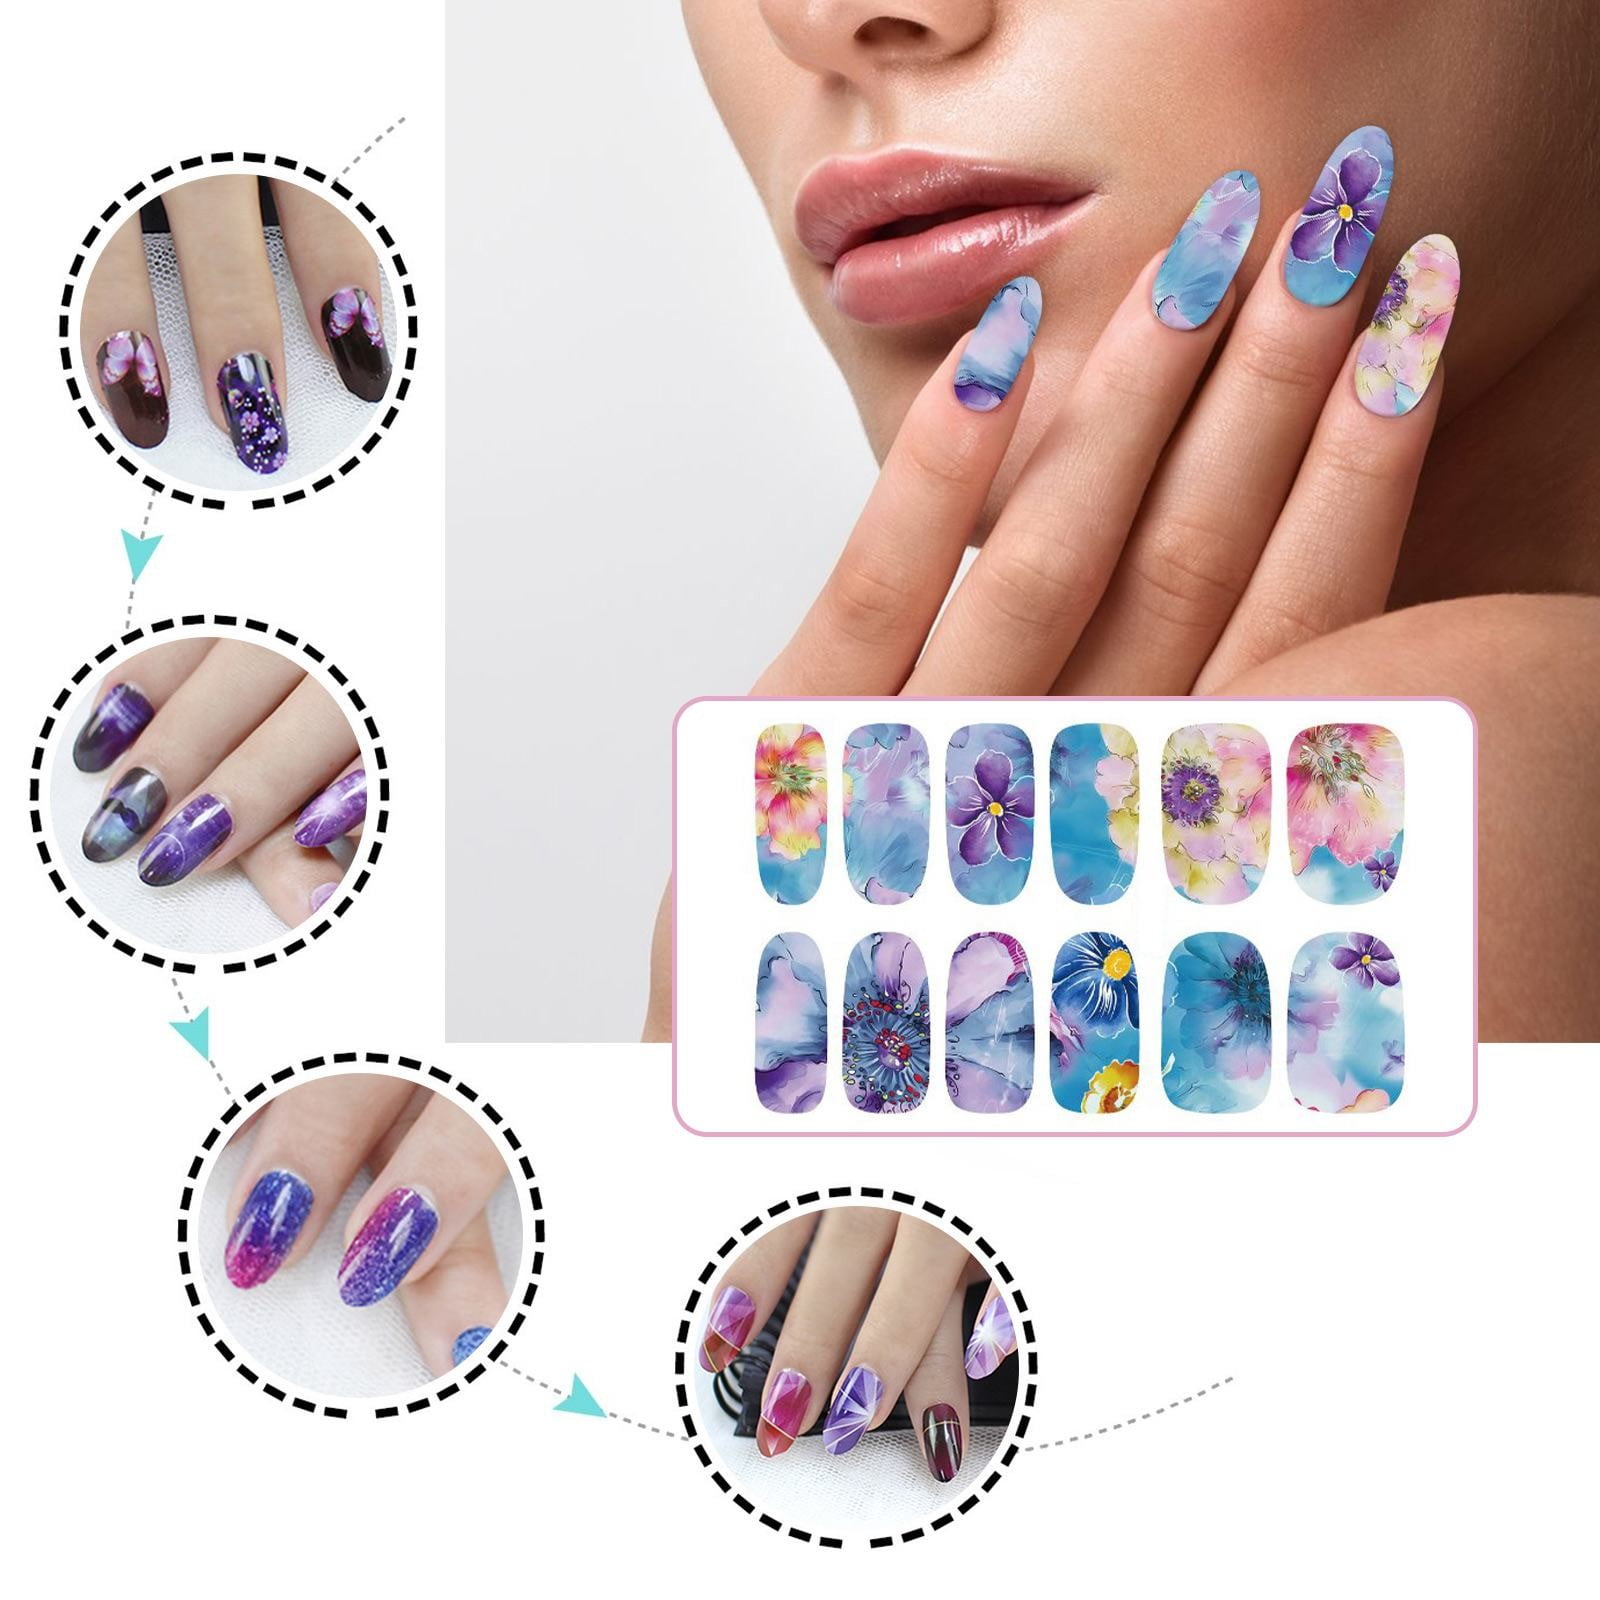 Buy Nail Art & Stickers Online